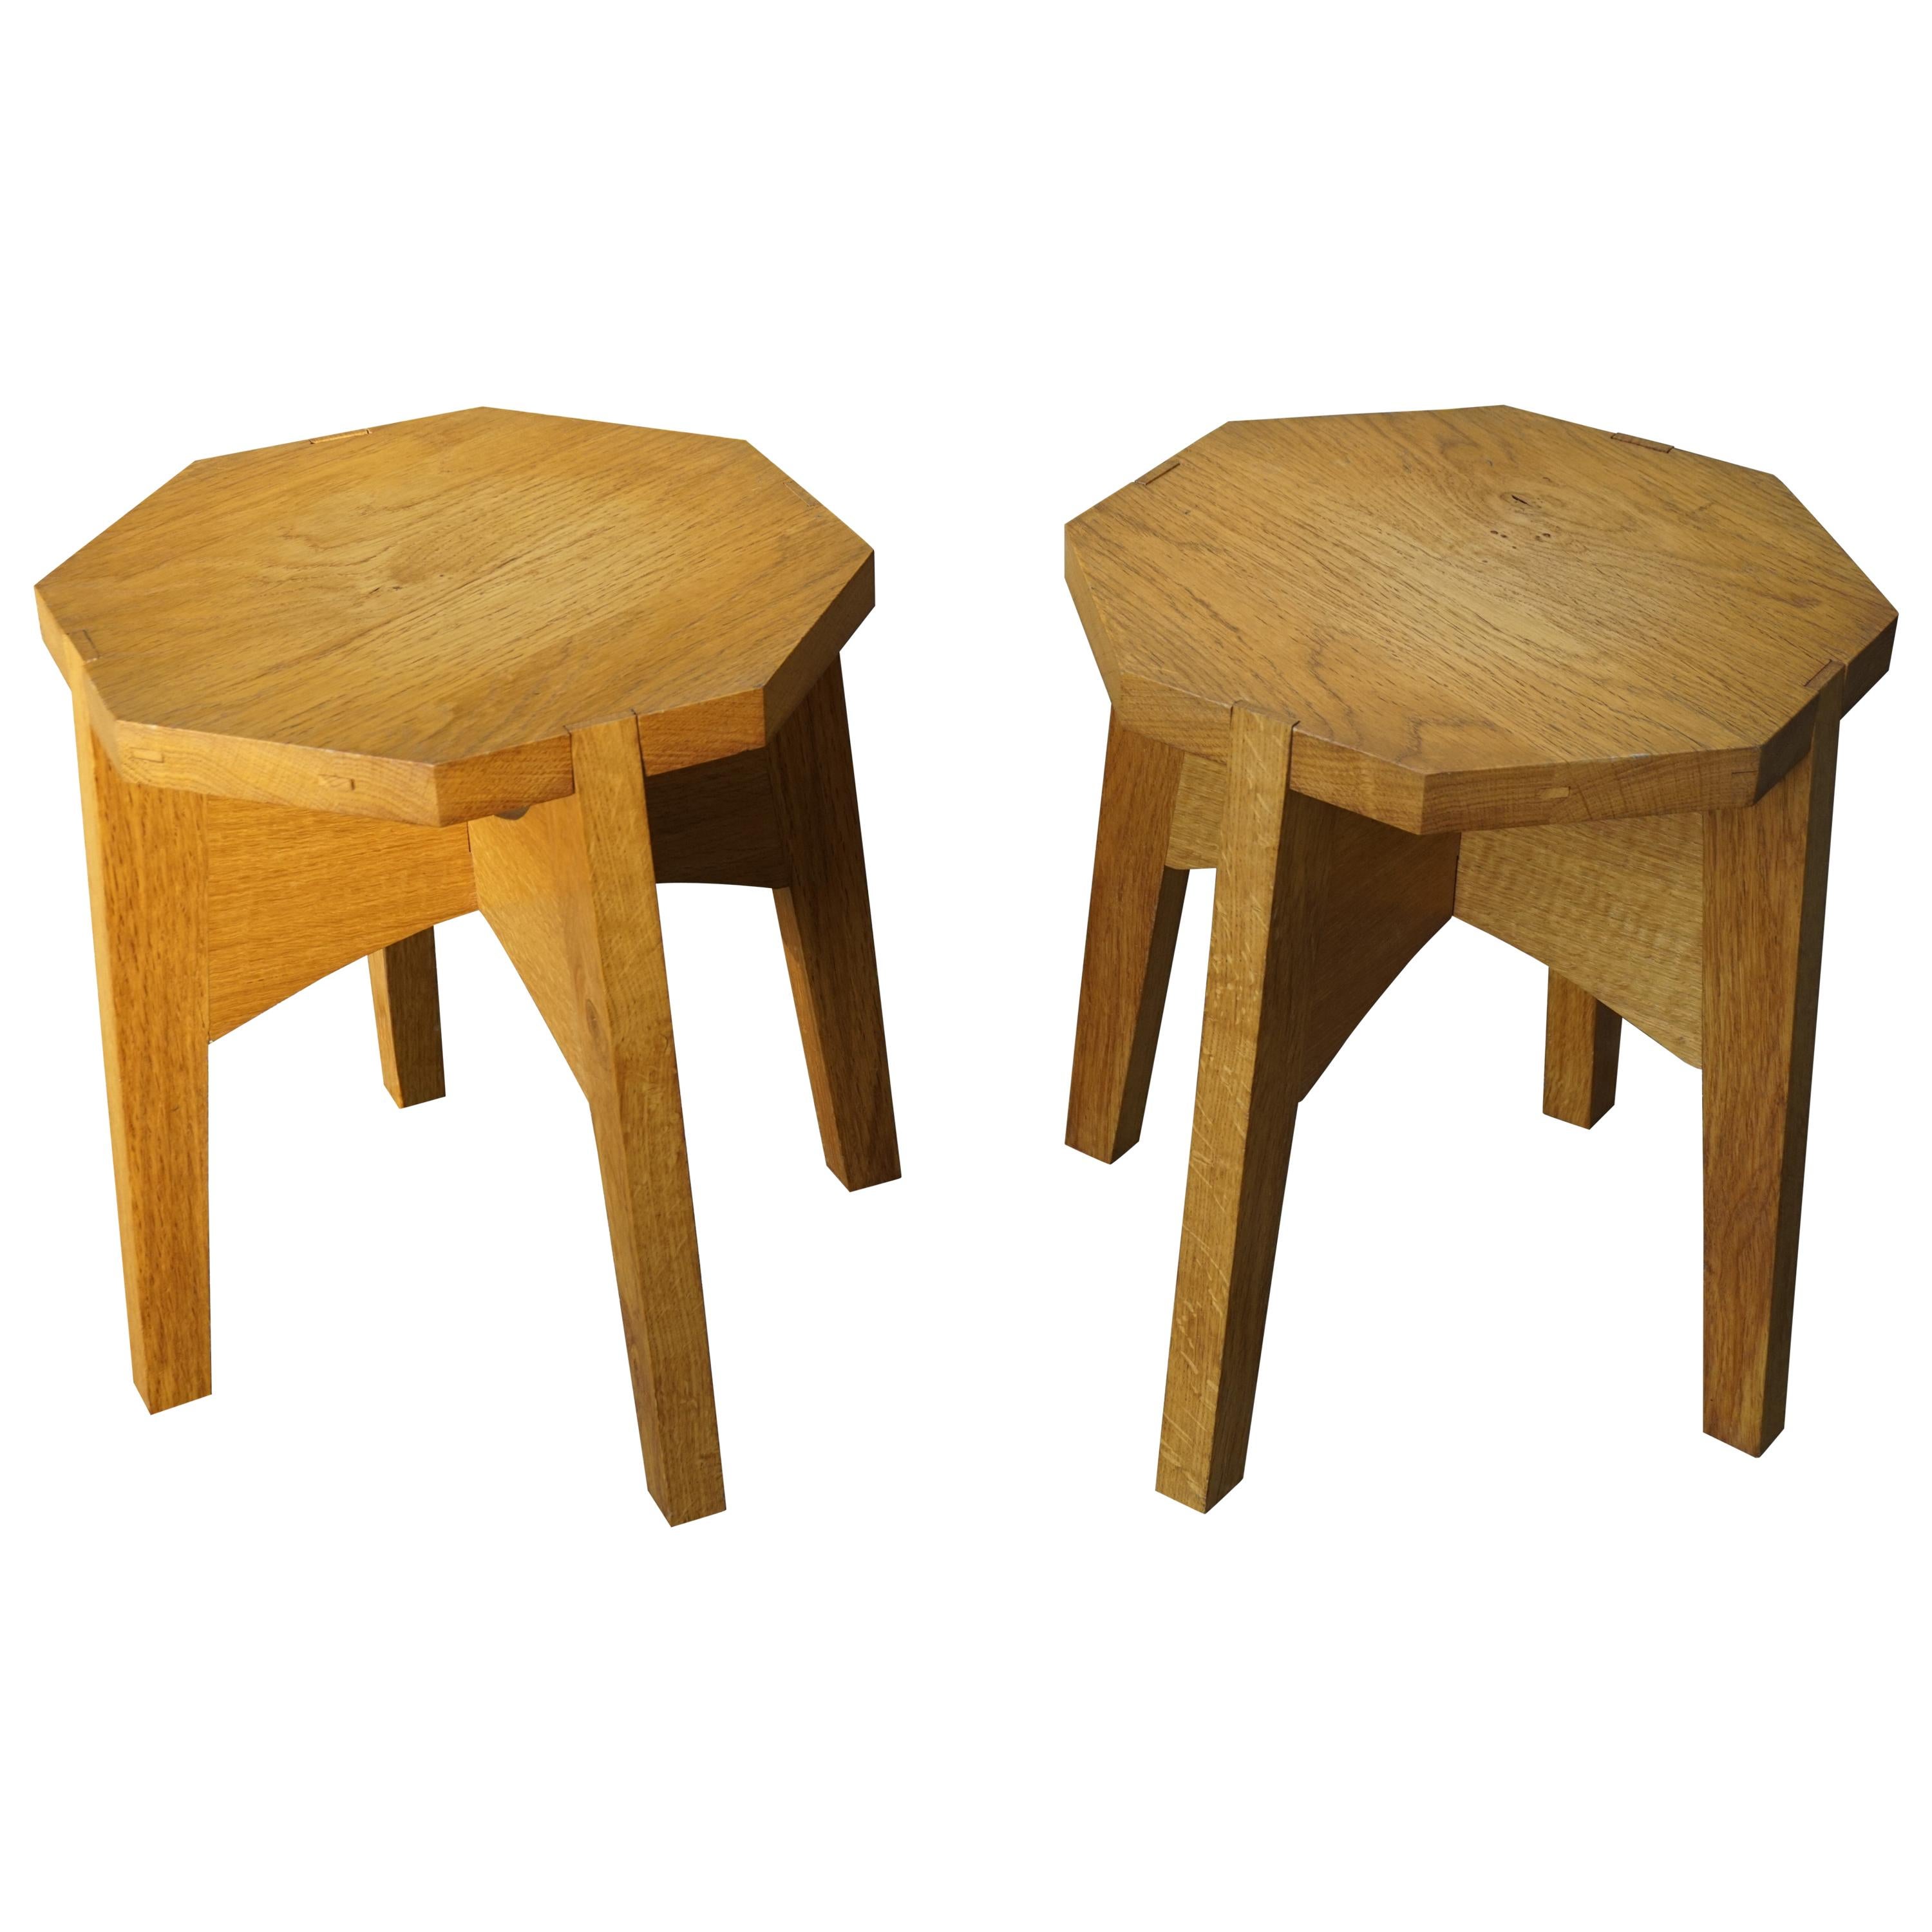 Pair of Midcentury Made, Dismantable Solid Oak End Tables of Excellent Condition